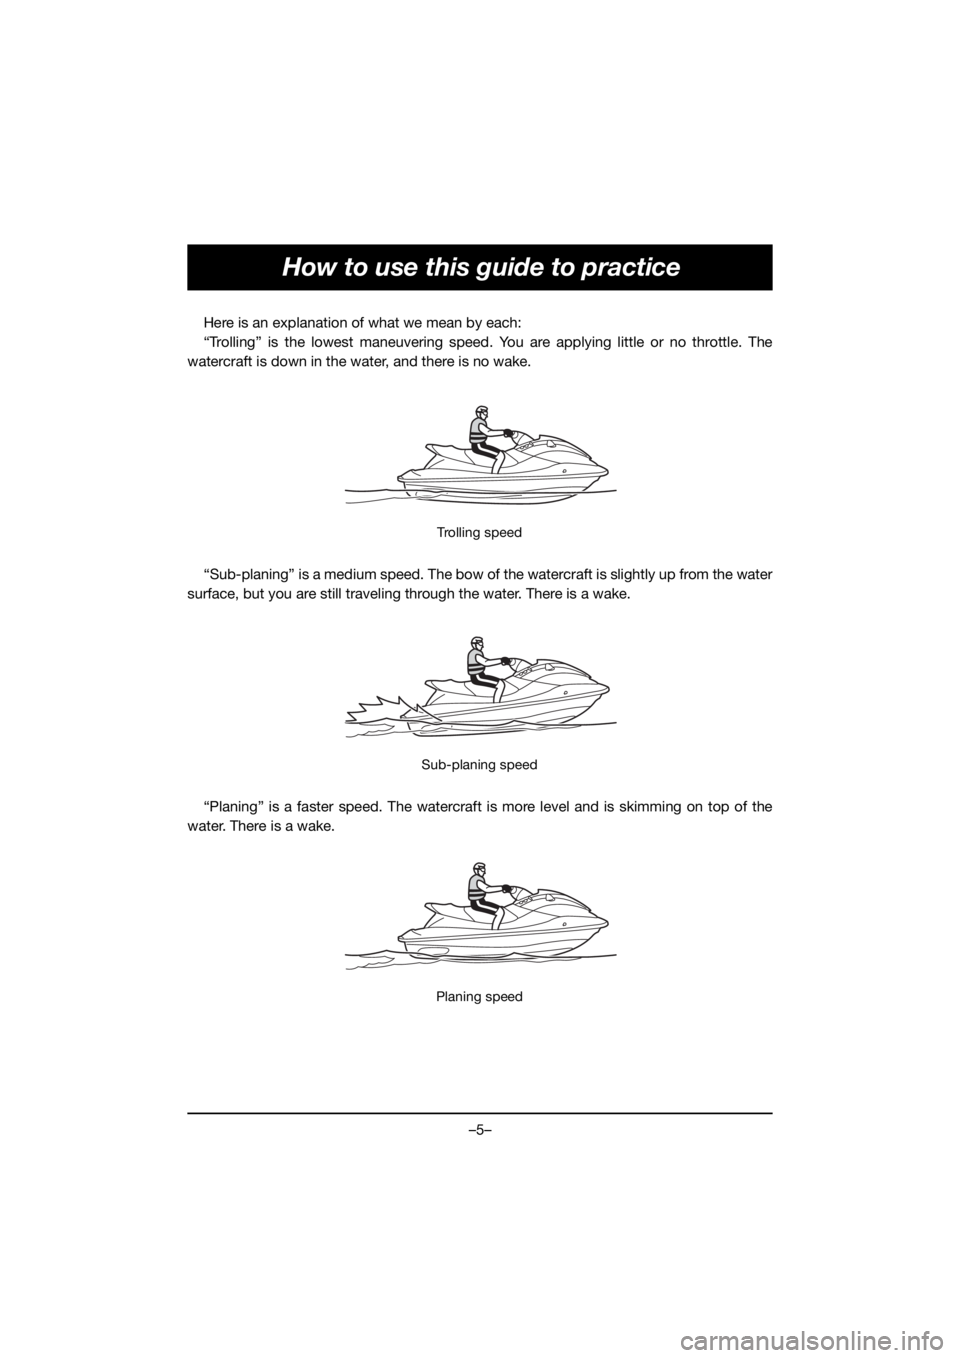 YAMAHA EX SPORT 2020  Manuale de Empleo (in Spanish) –5–
How to use this guide to practice
Here is an explanation of what we mean by each:
“Trolling” is the lowest maneuvering speed. You are applying little or no throttle. The
watercraft is down